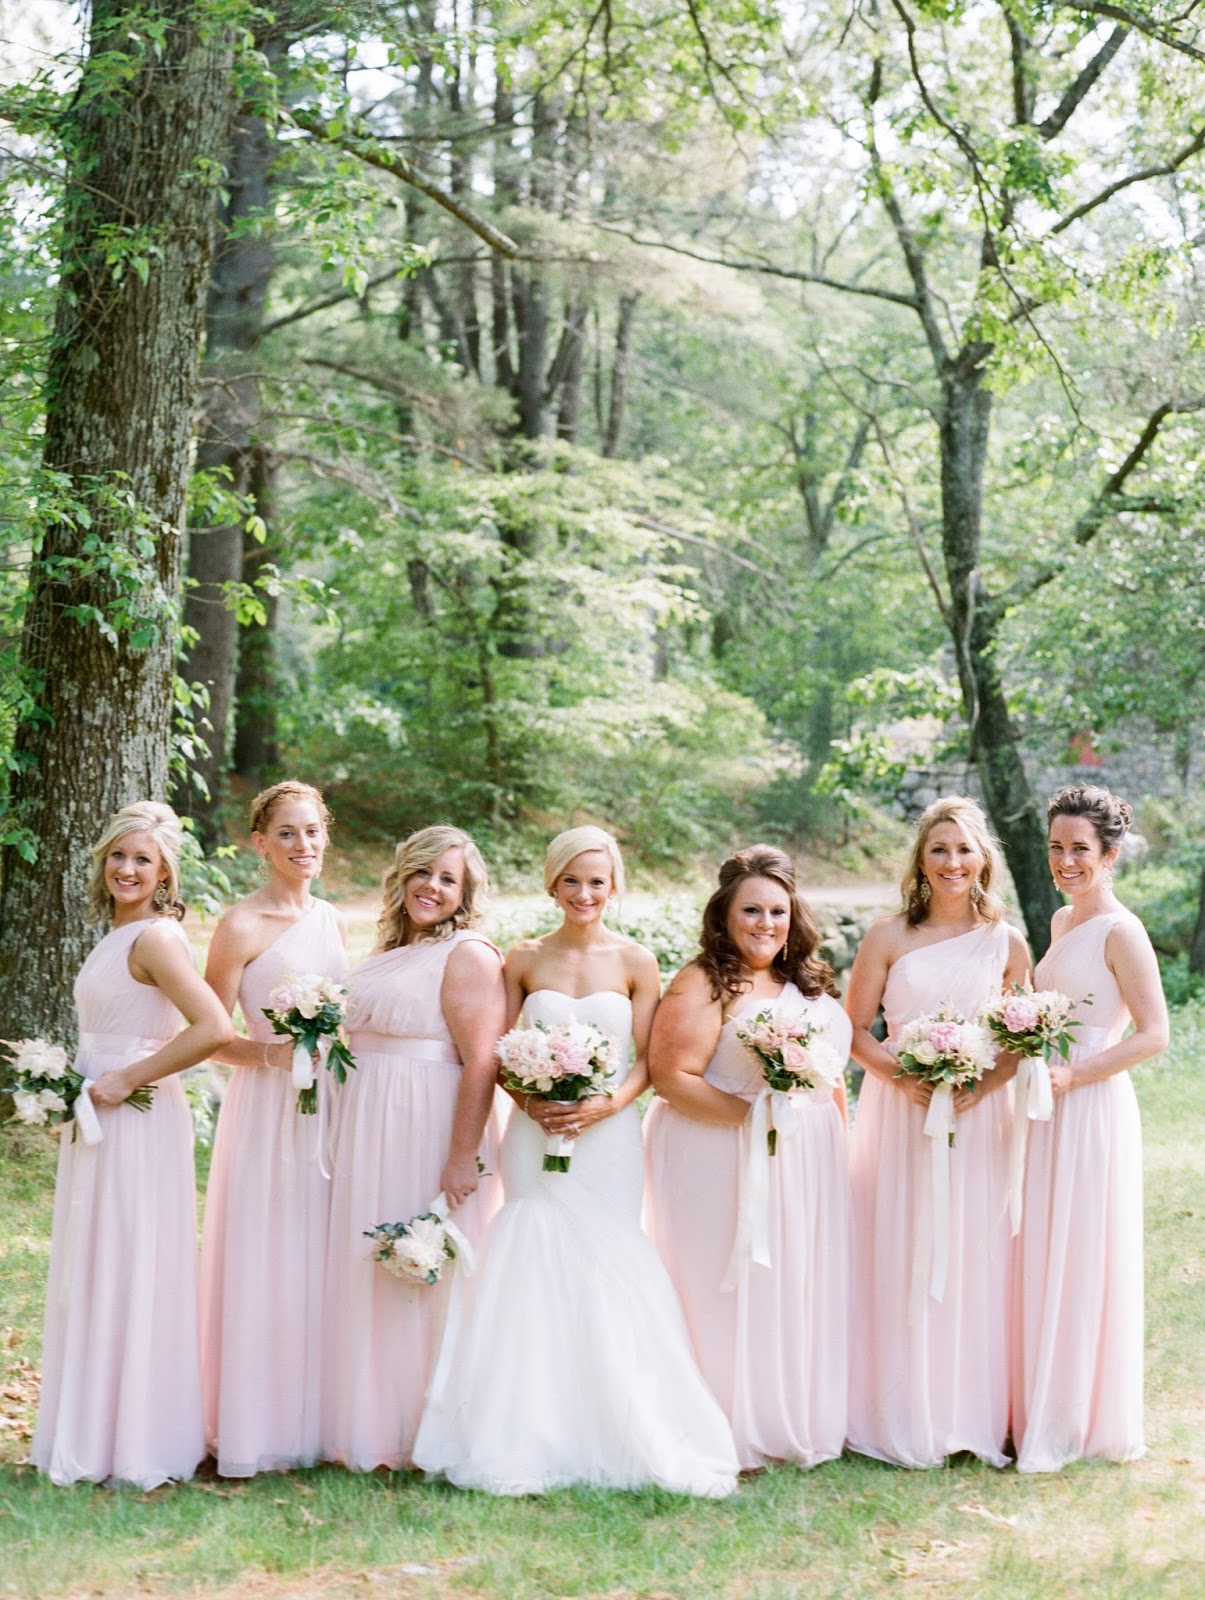 may wedding flowers: blush, white and soft green : ruth eileen ...